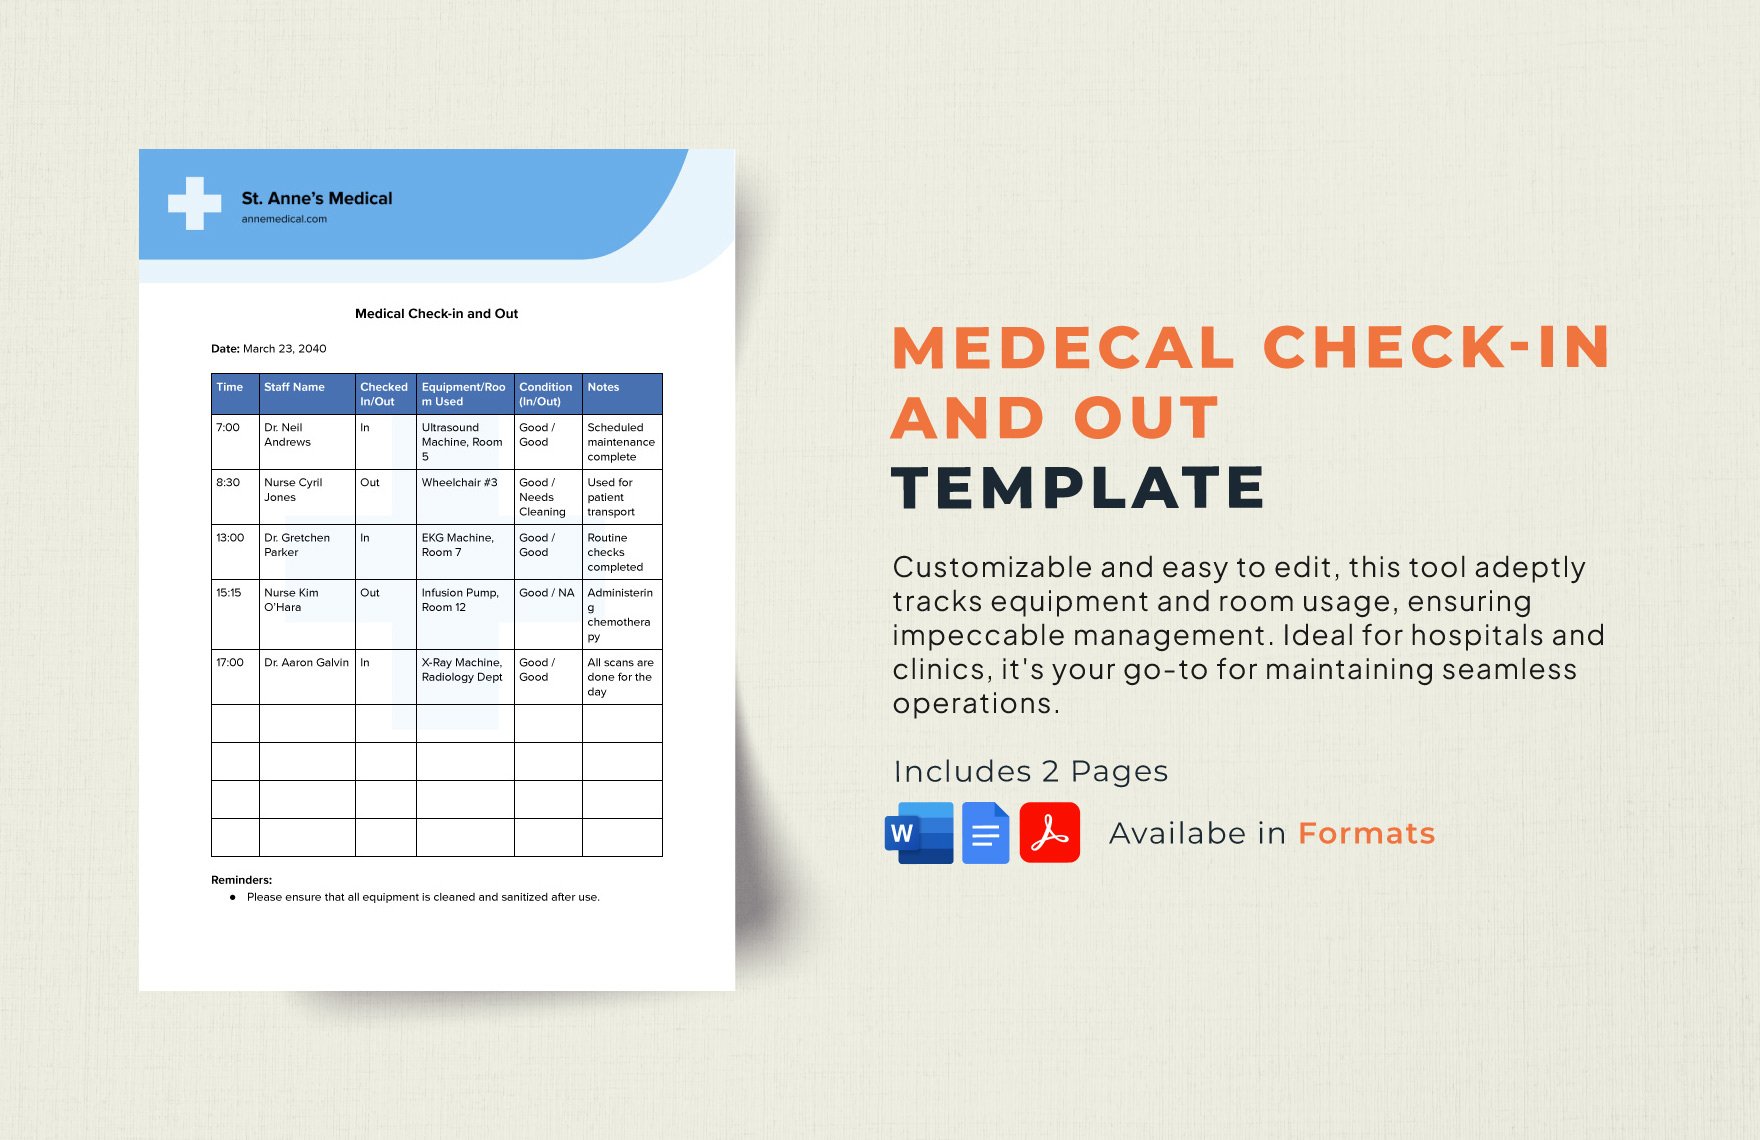 Medical Check-in and Out Template